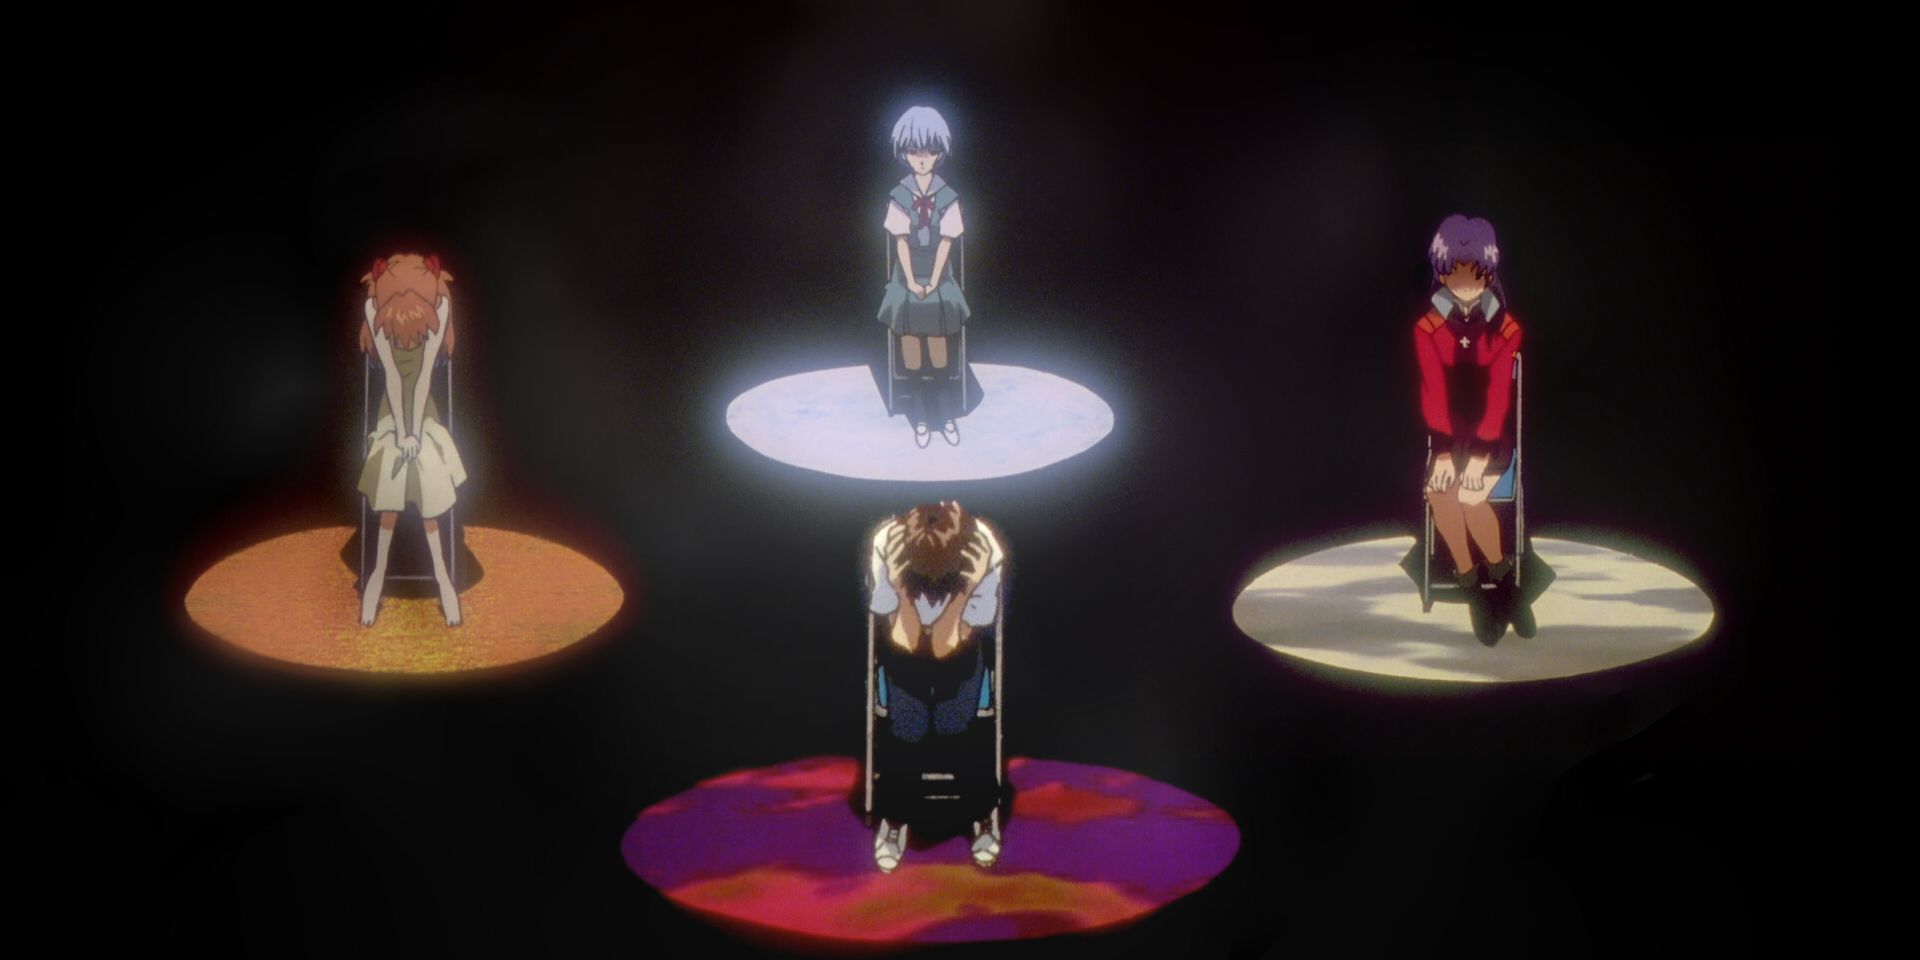 Shinji engages in the human instrumentality project in Neon Genesis Evangelion